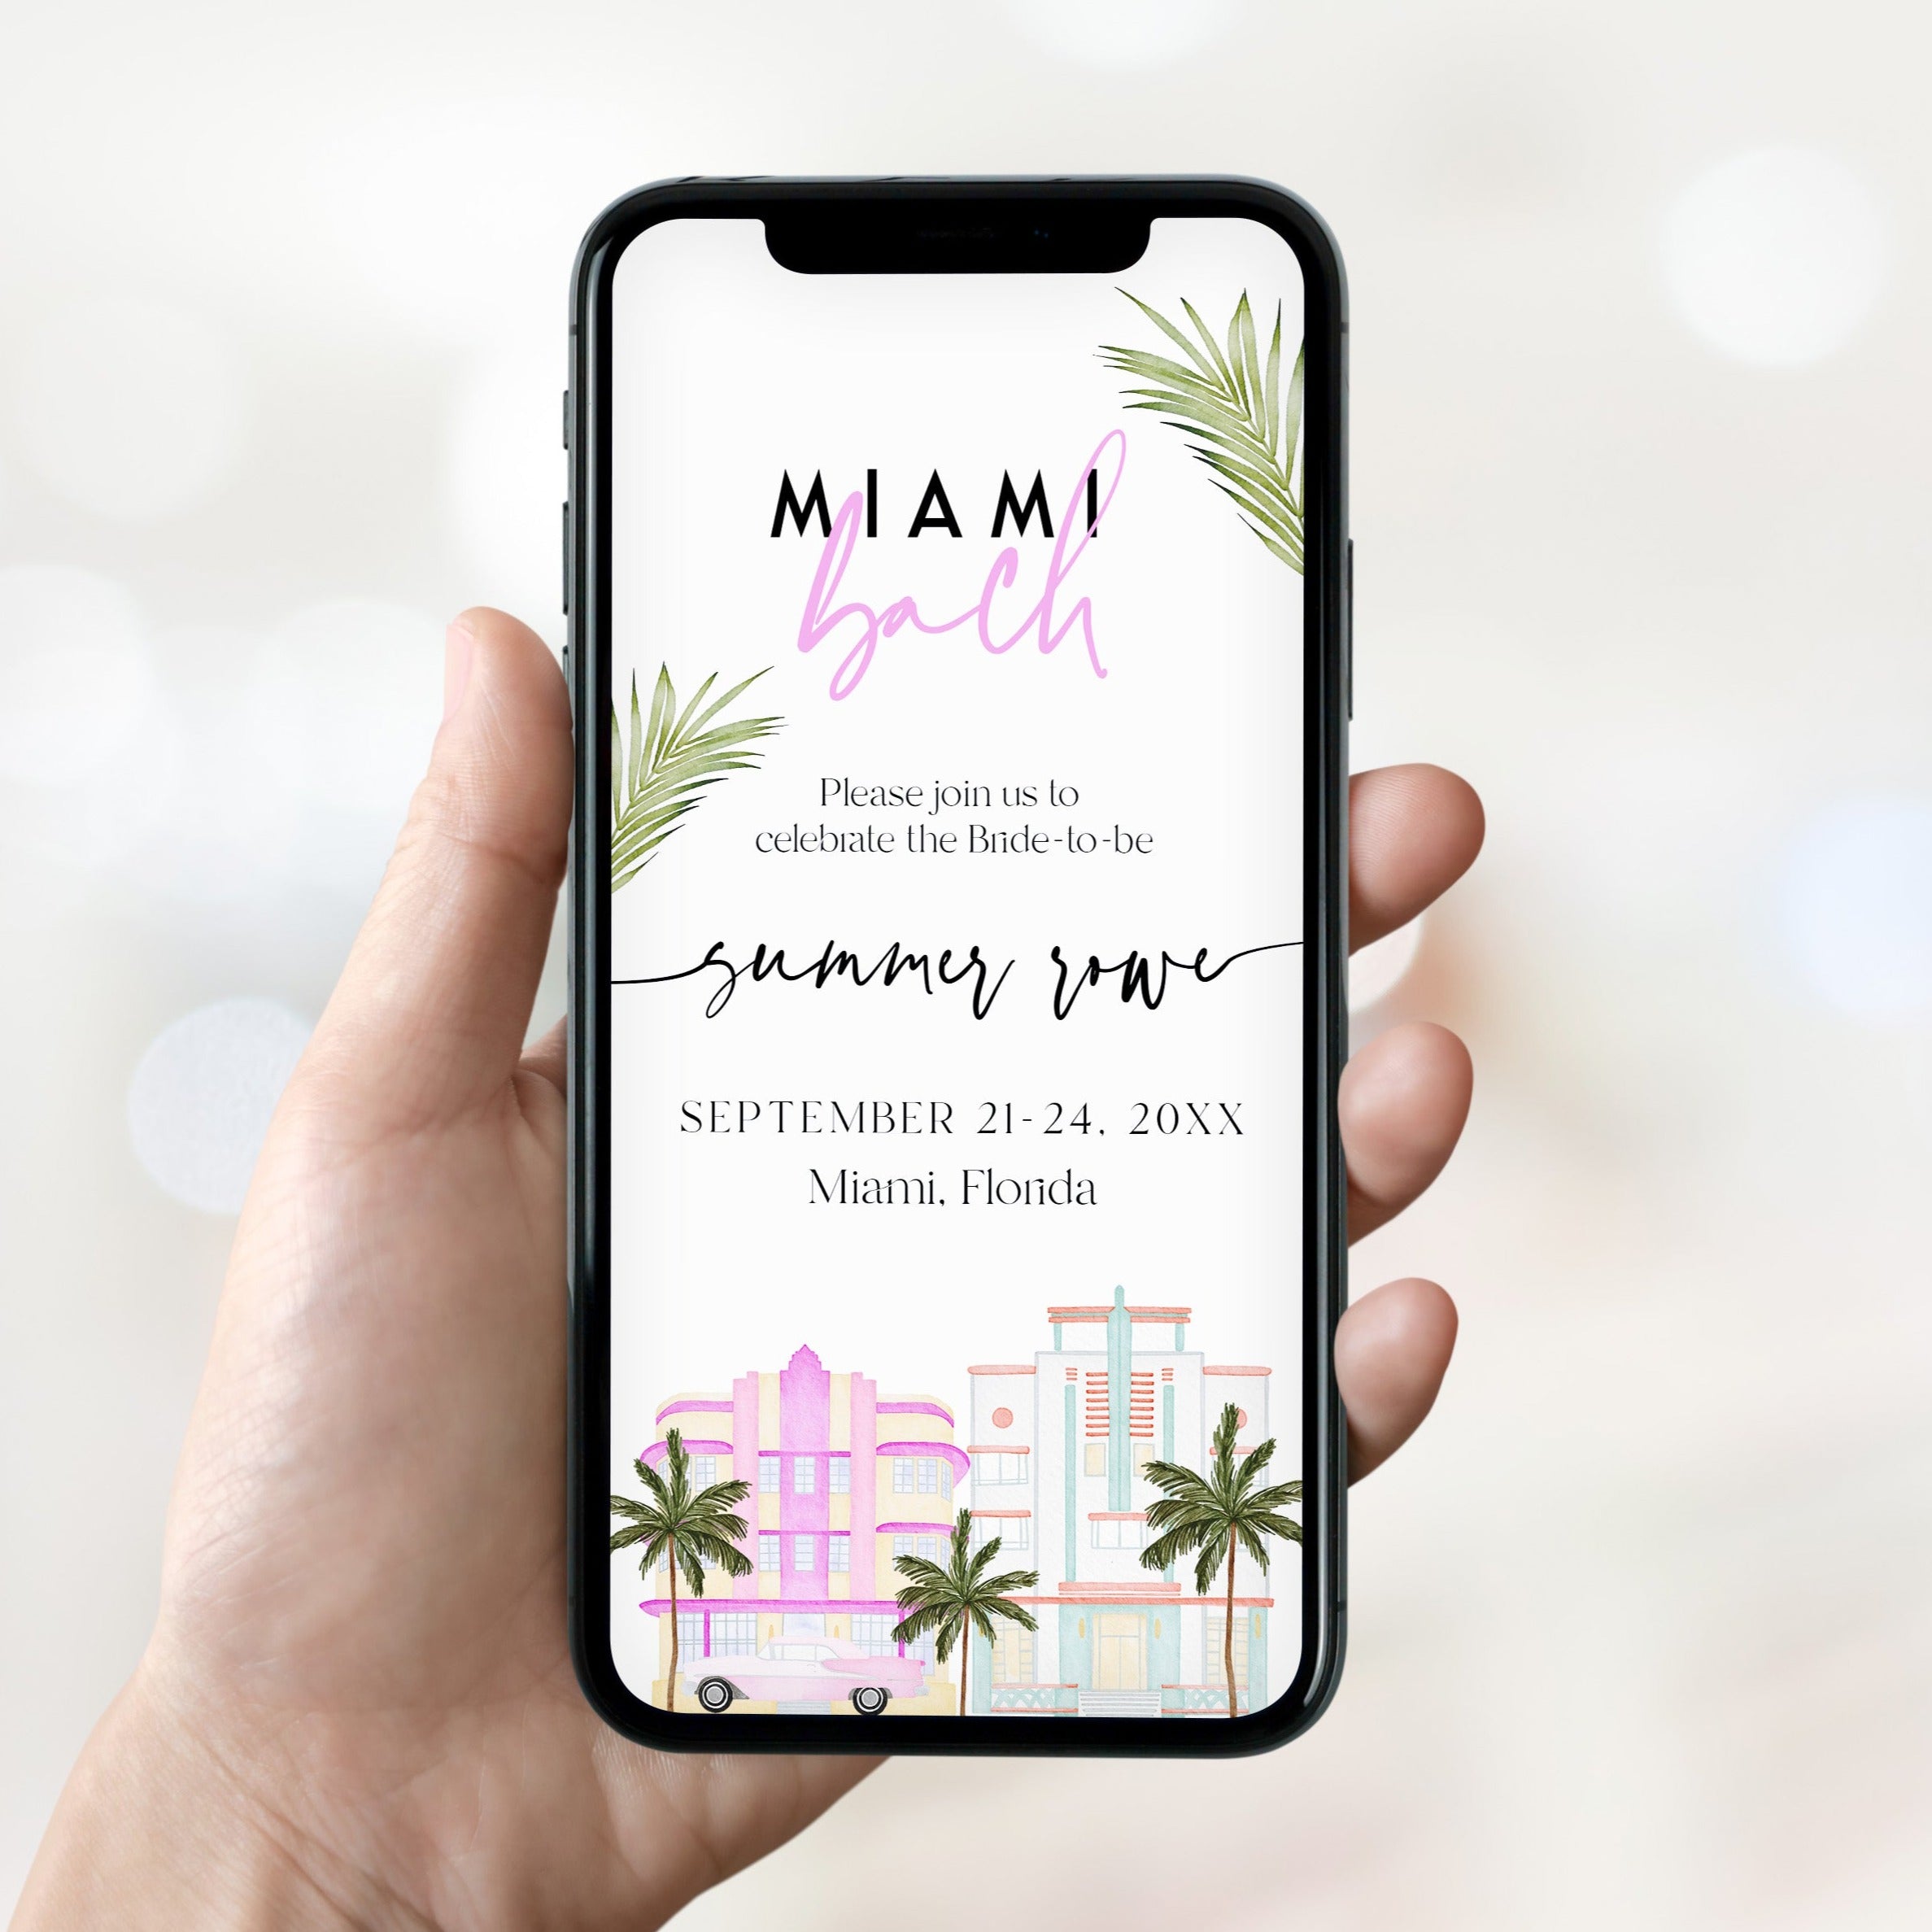 Fully editable and printable mobile bachelorette invitation with a miami design. Perfect for a miami, Bachelorette themed party